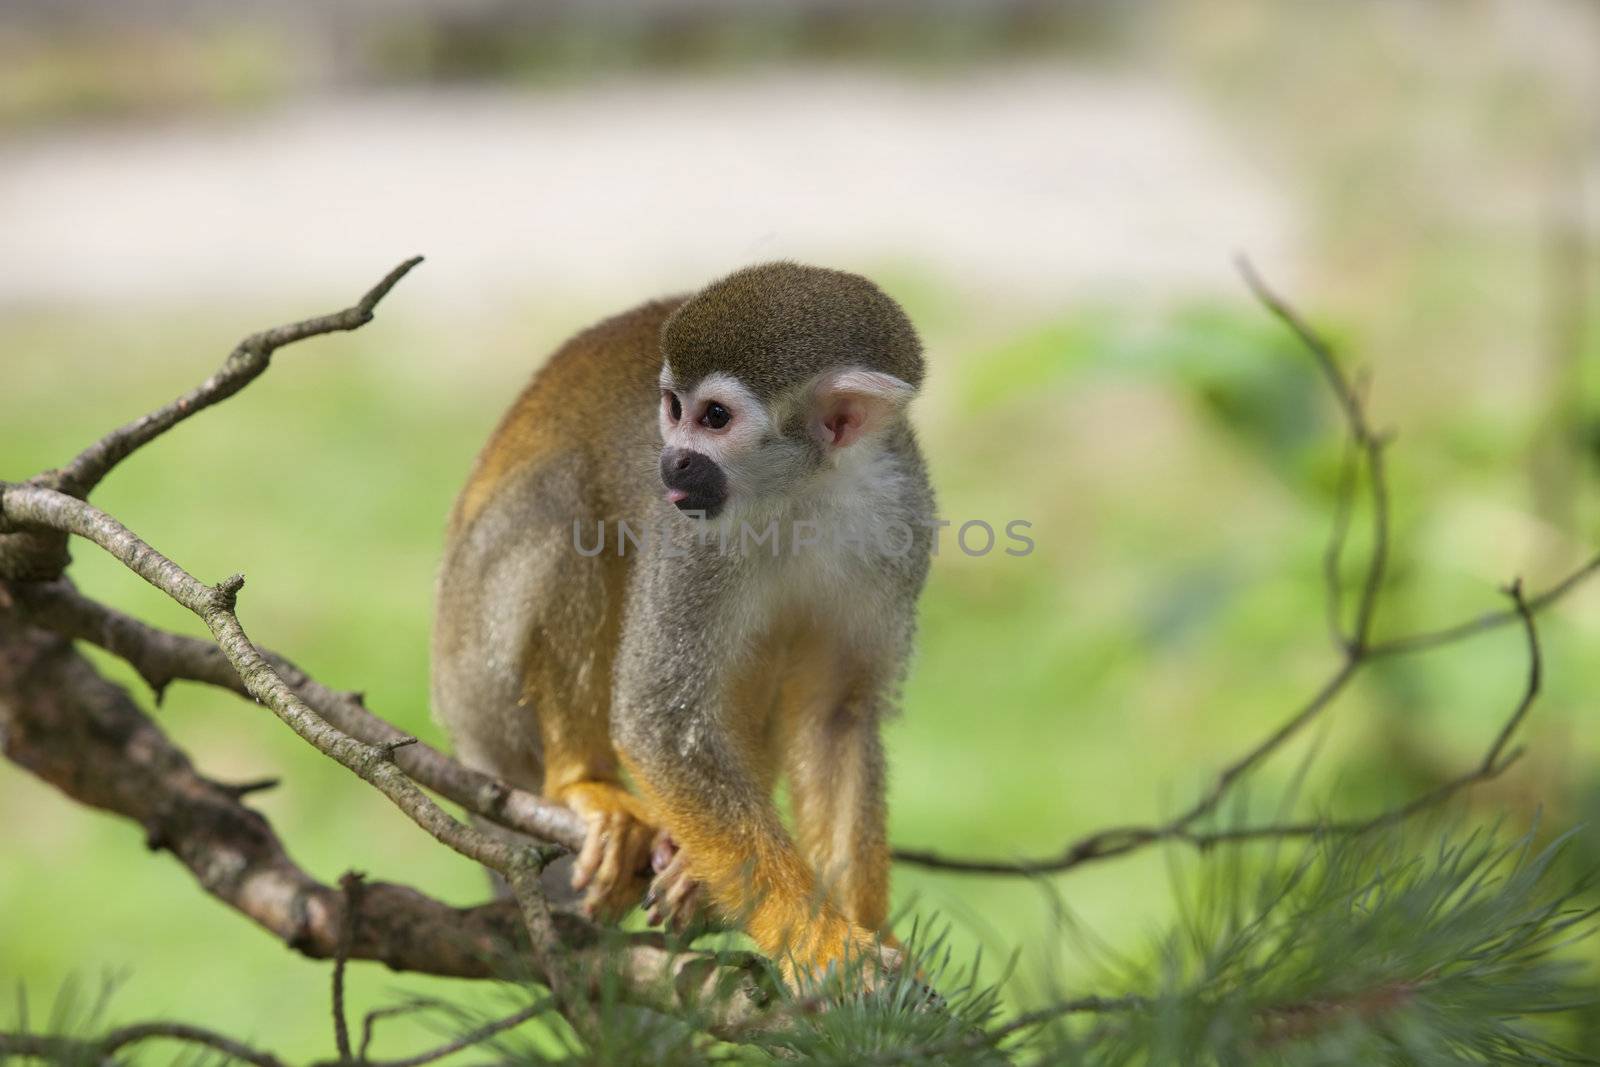 A common squirrel monkey playing in the trees